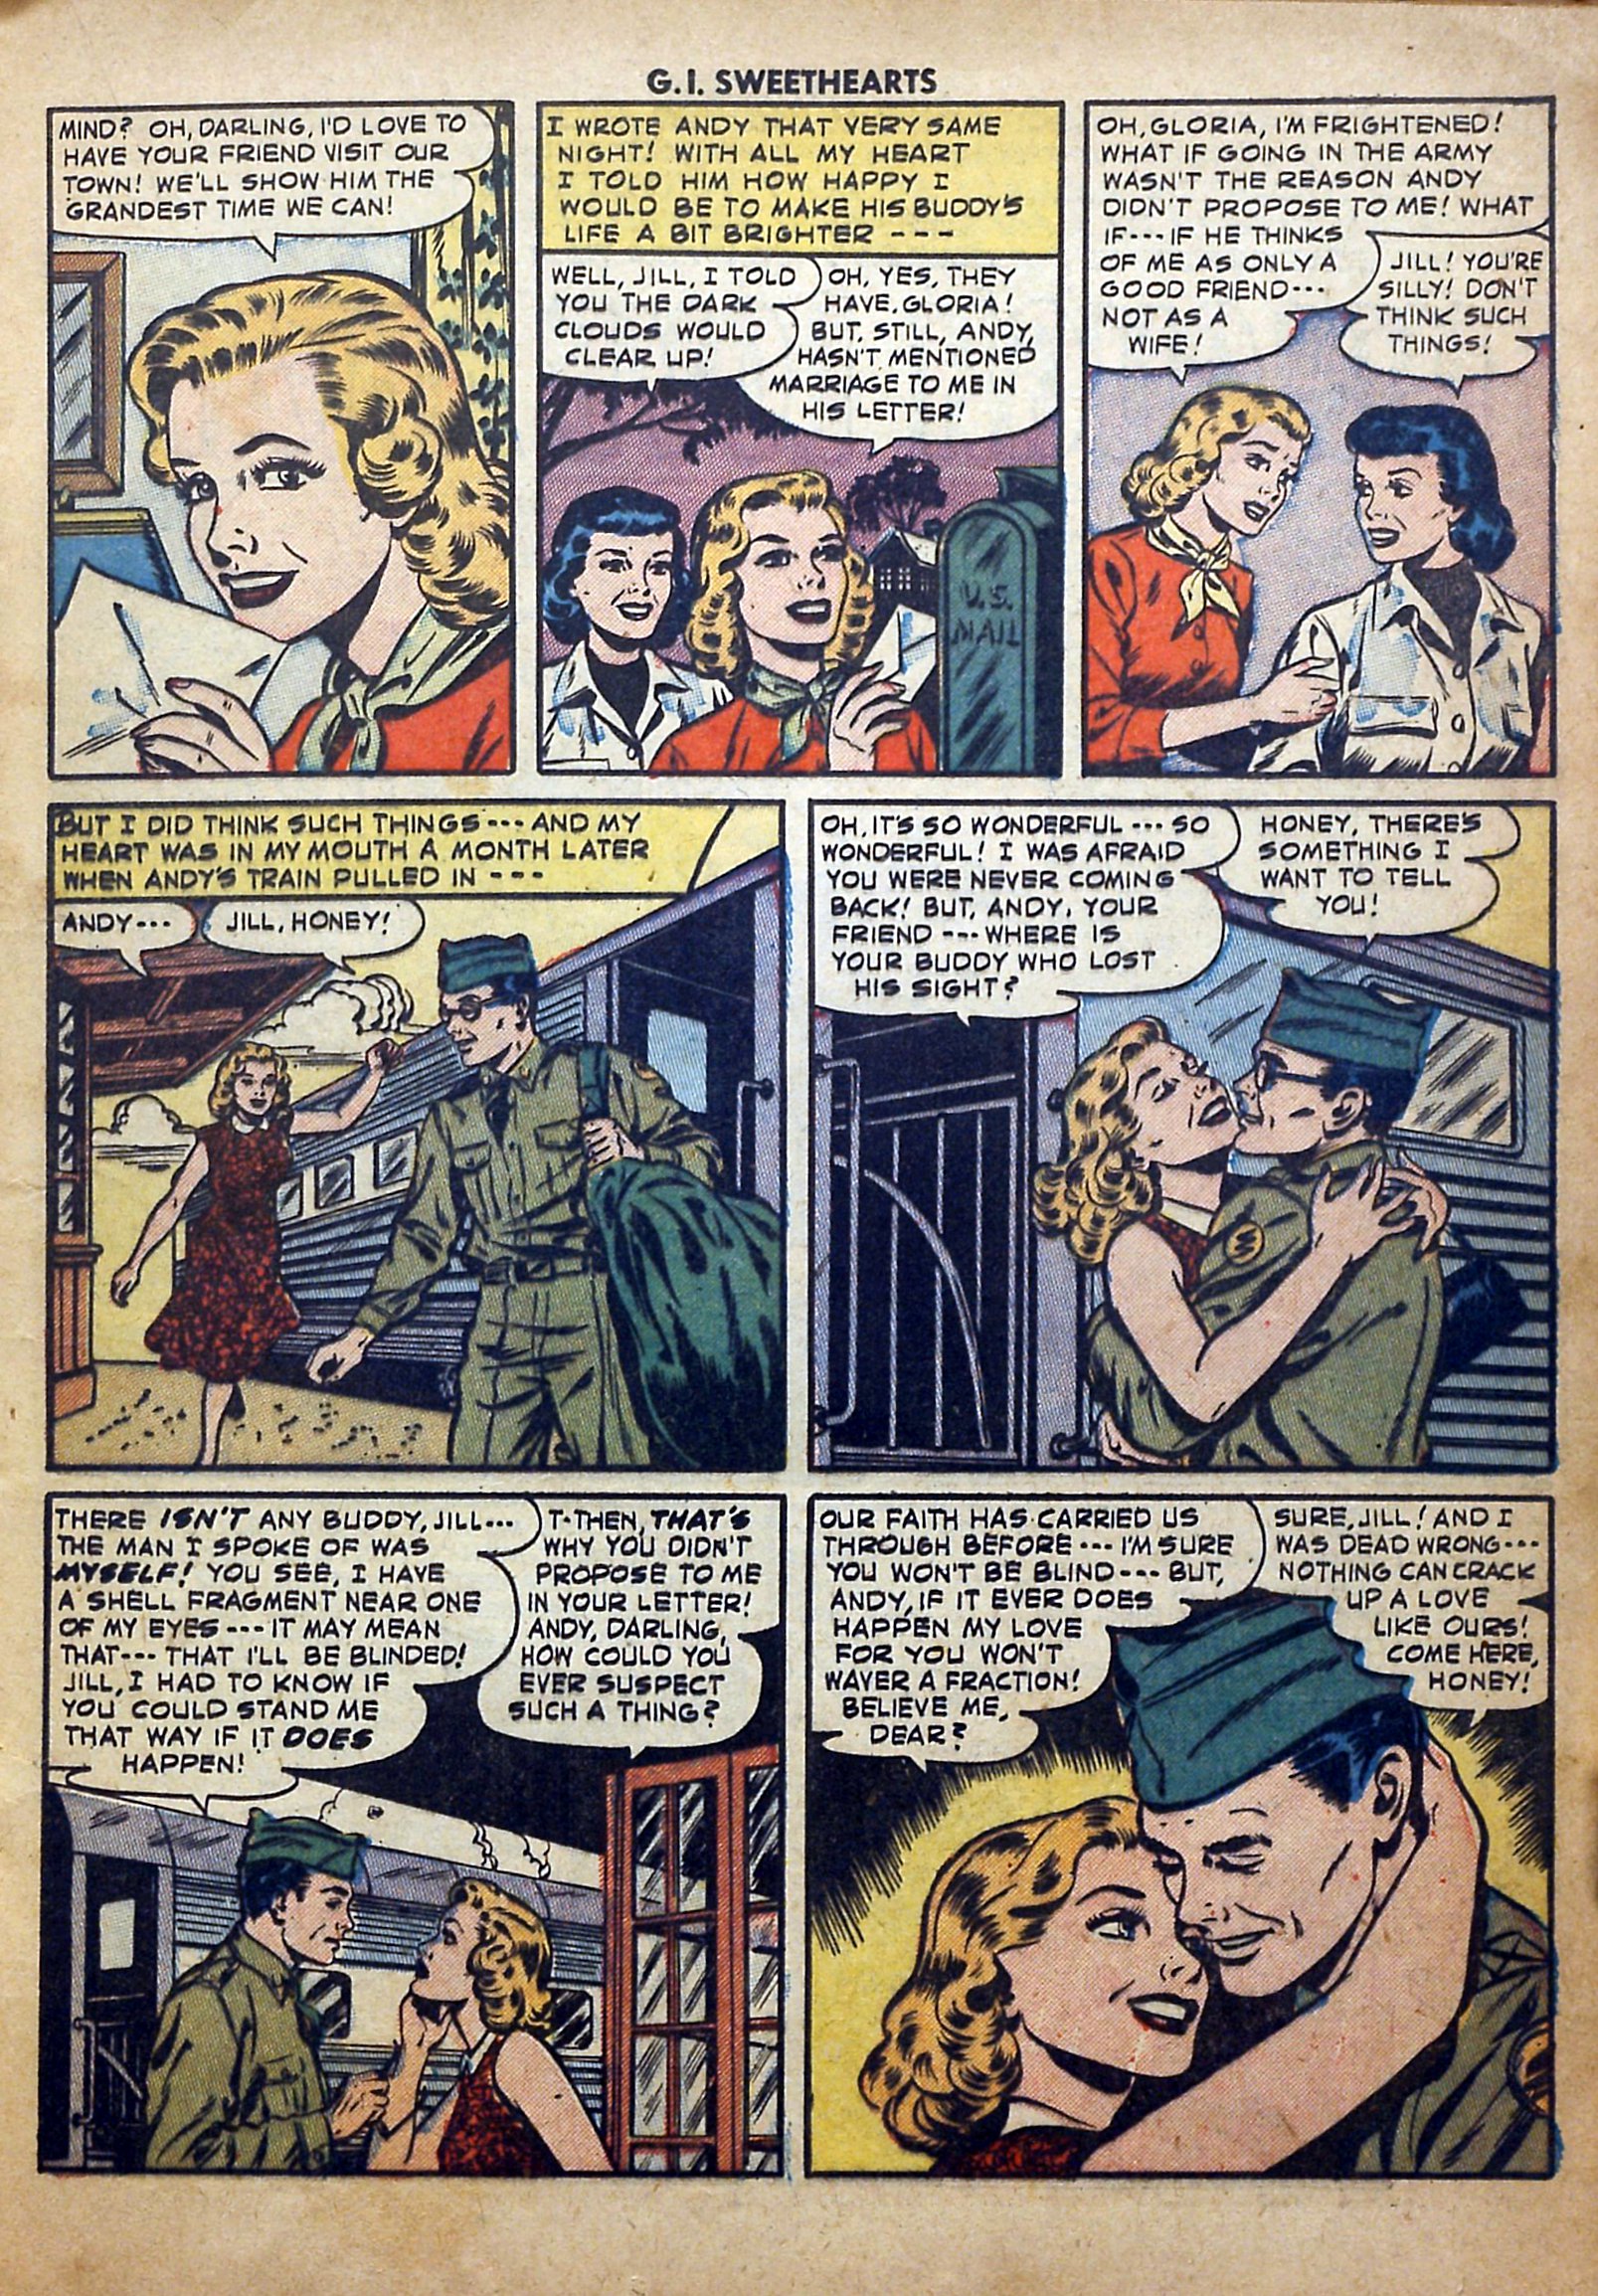 Read online G.I. Sweethearts comic -  Issue #39 - 17